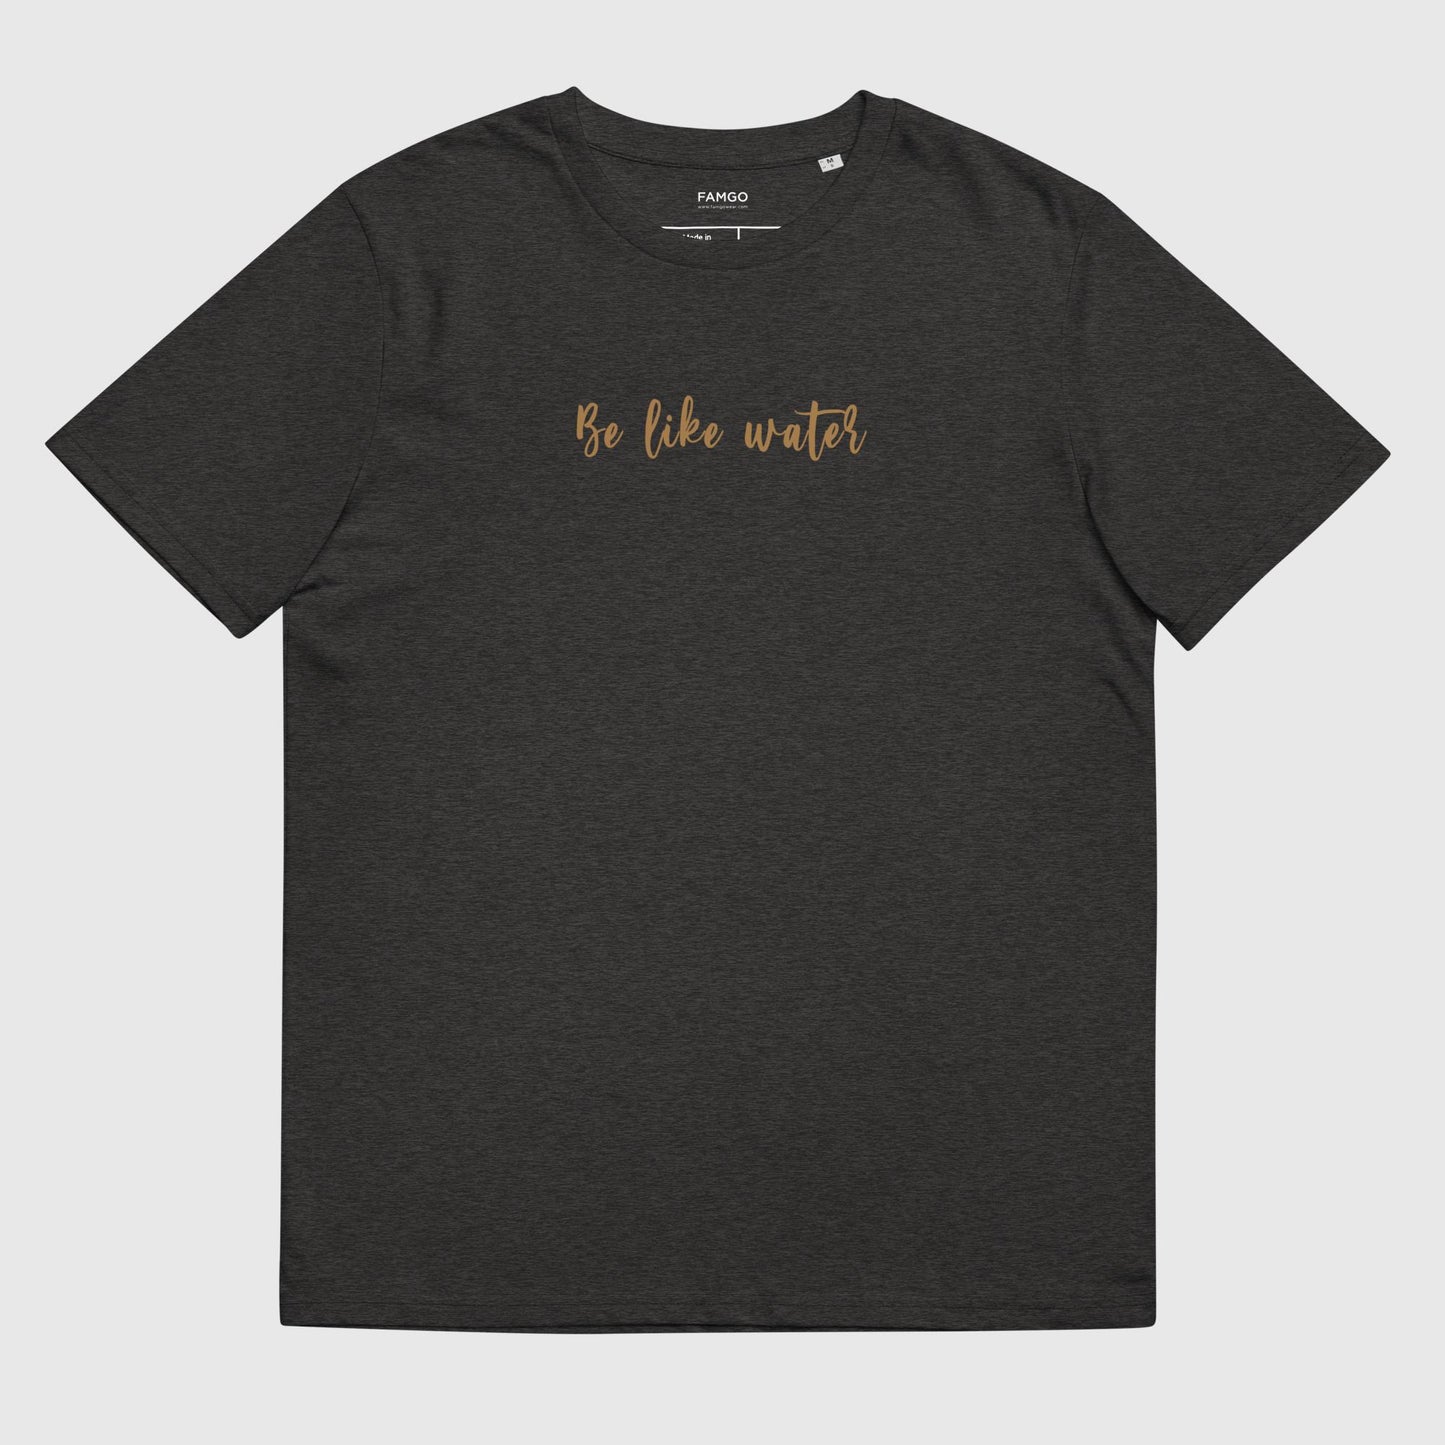 Men's dark heather gray organic cotton t-shirt that features Bruce Lee's inspirational quote, "Be Like Water."